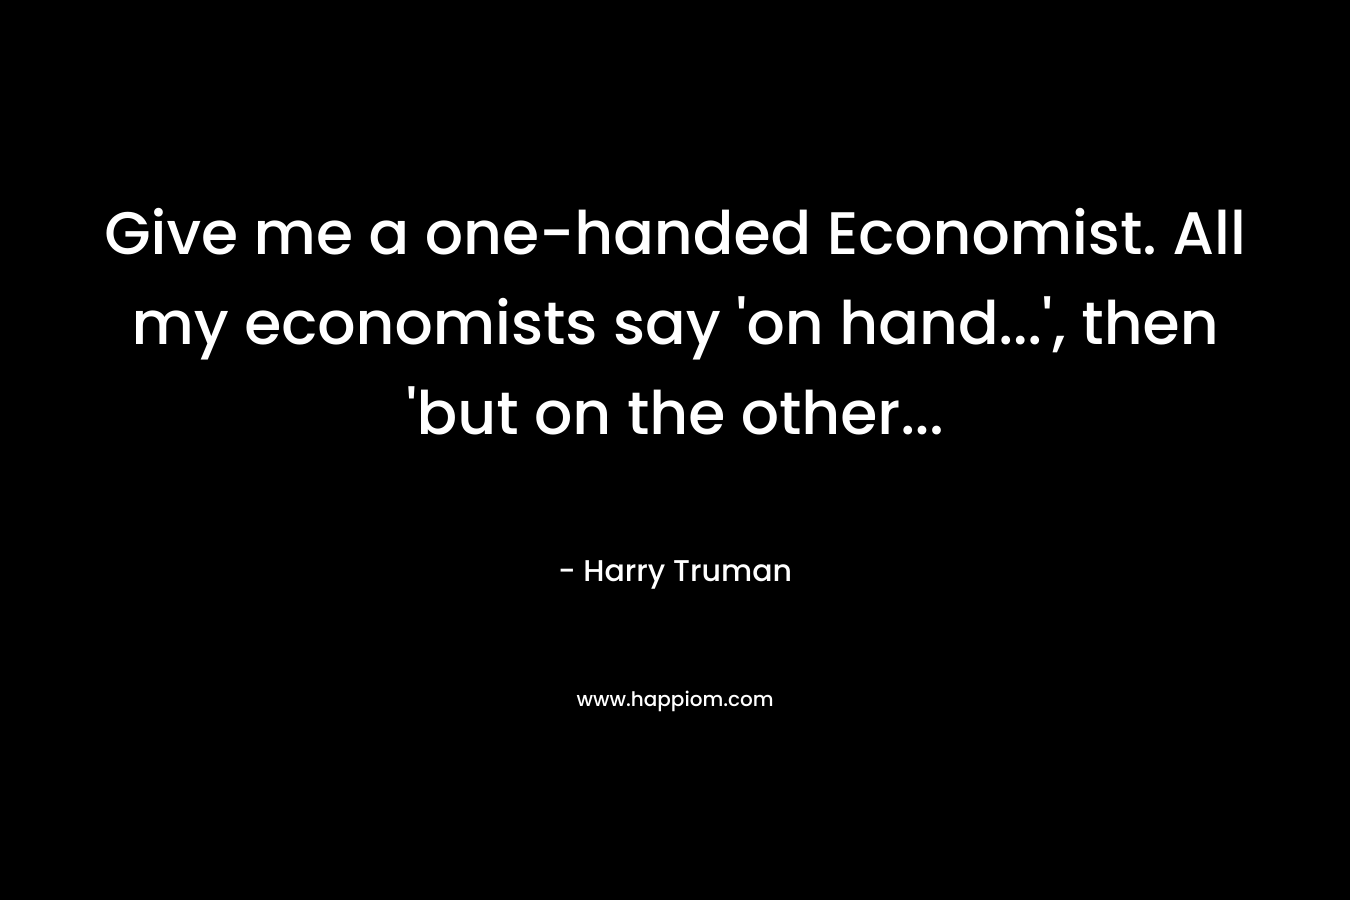 Give me a one-handed Economist. All my economists say 'on hand...', then 'but on the other...